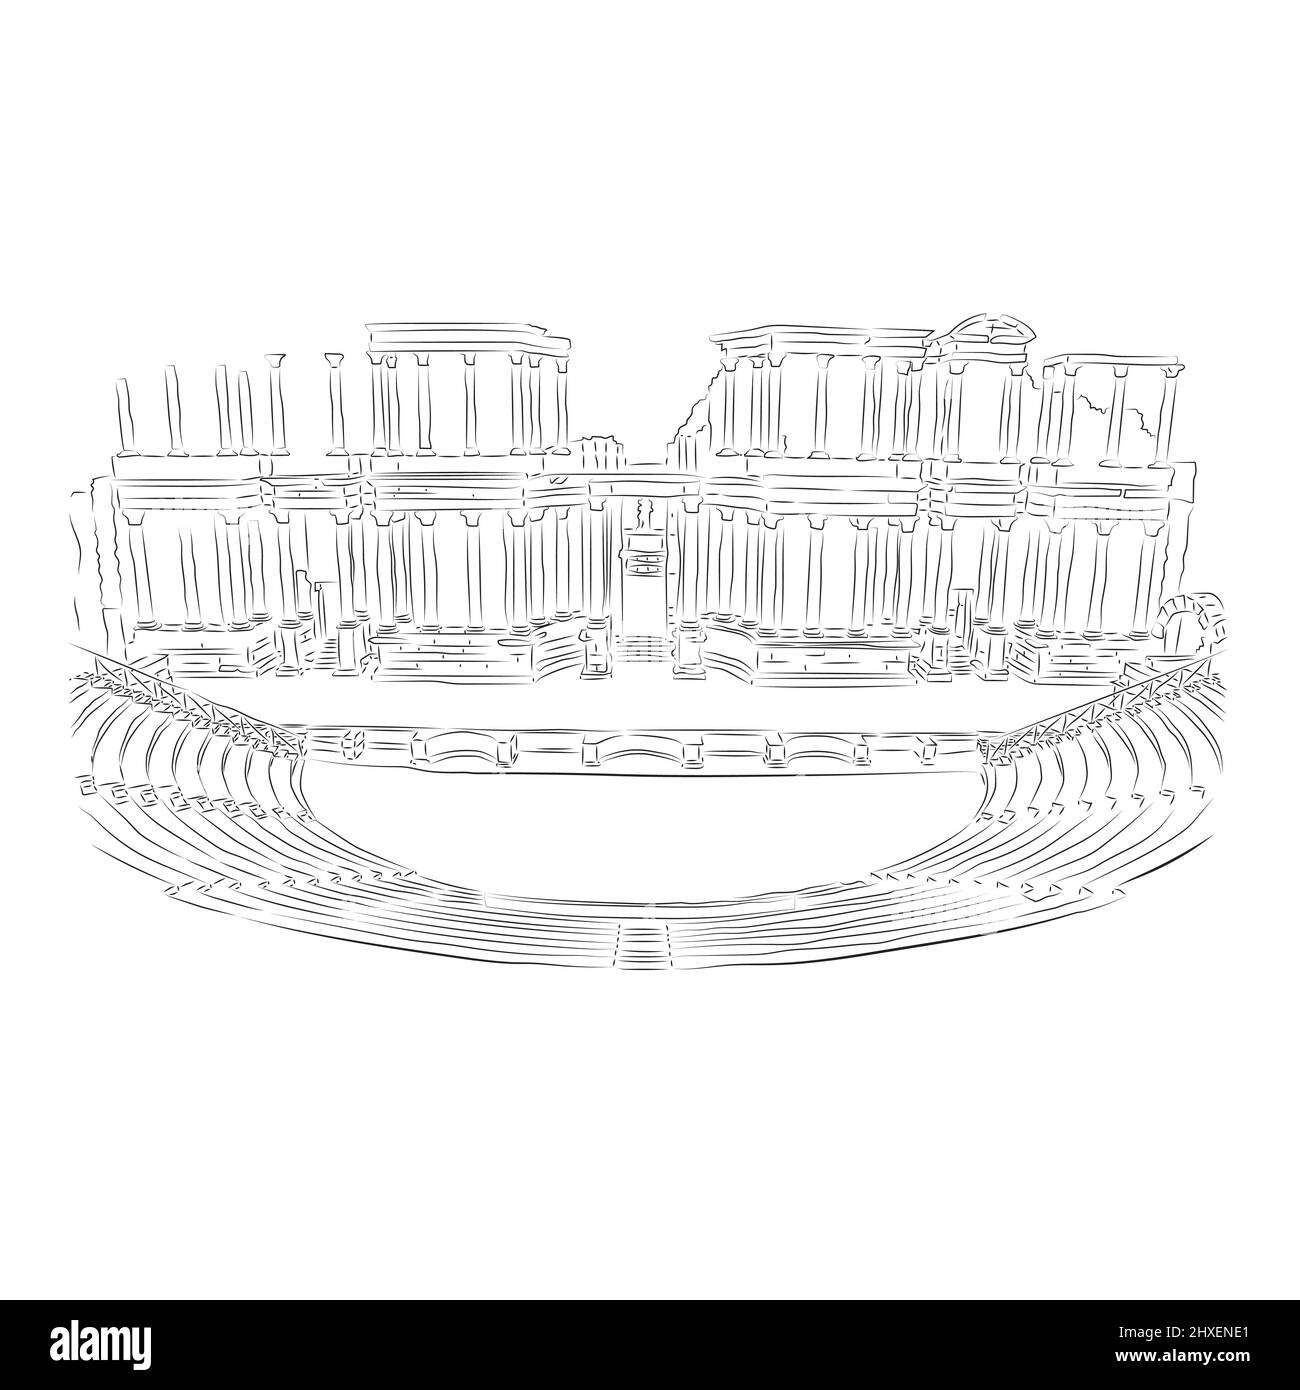 Theater Stage Sketch Vector Images over 580